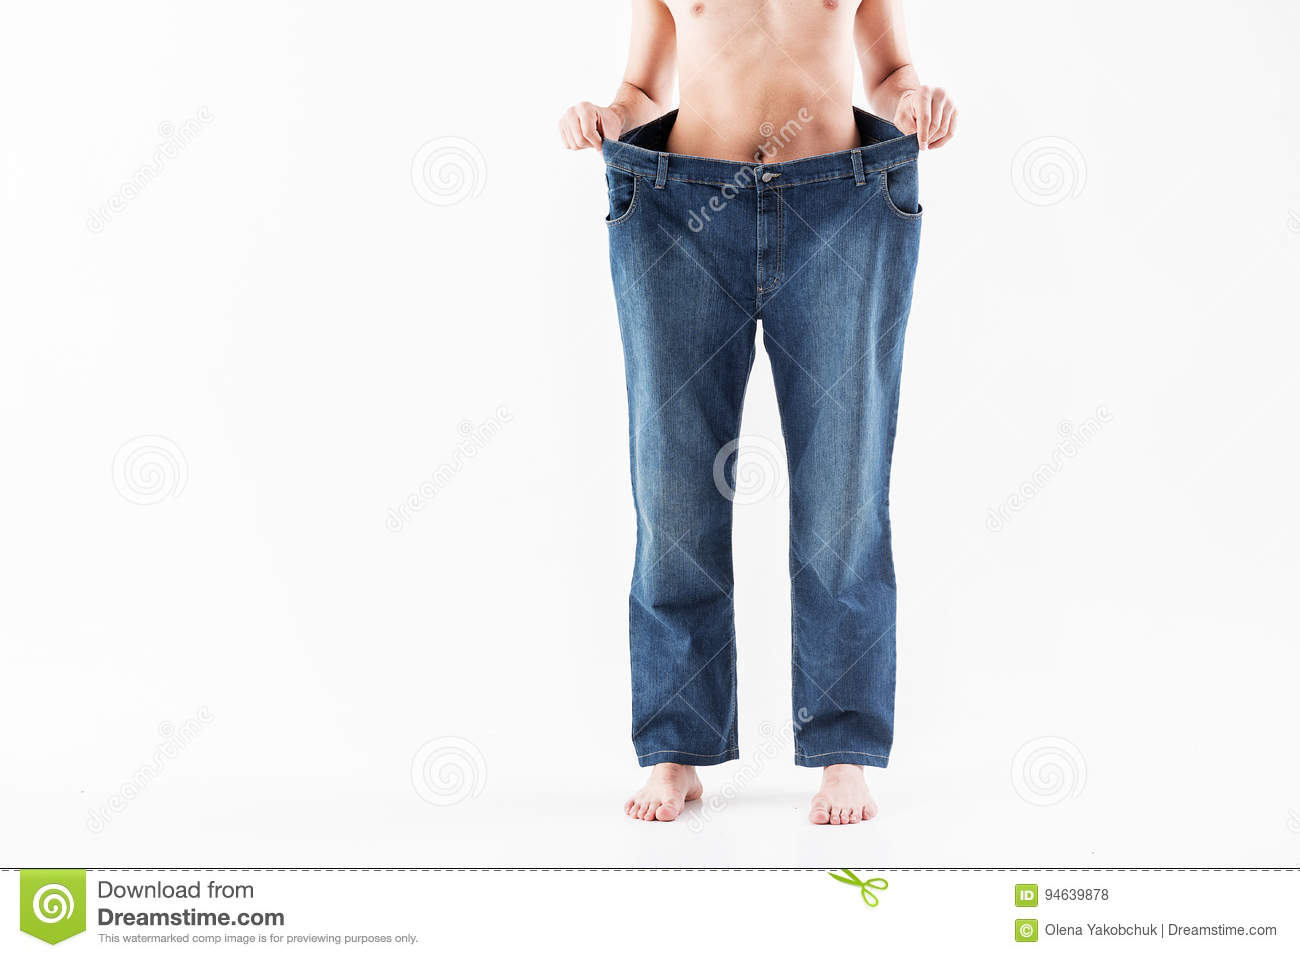 thin-guy-wearing-oversized-trousers-close-up-legs-young-slim-man-holding-large-jeans-successfu...jpg